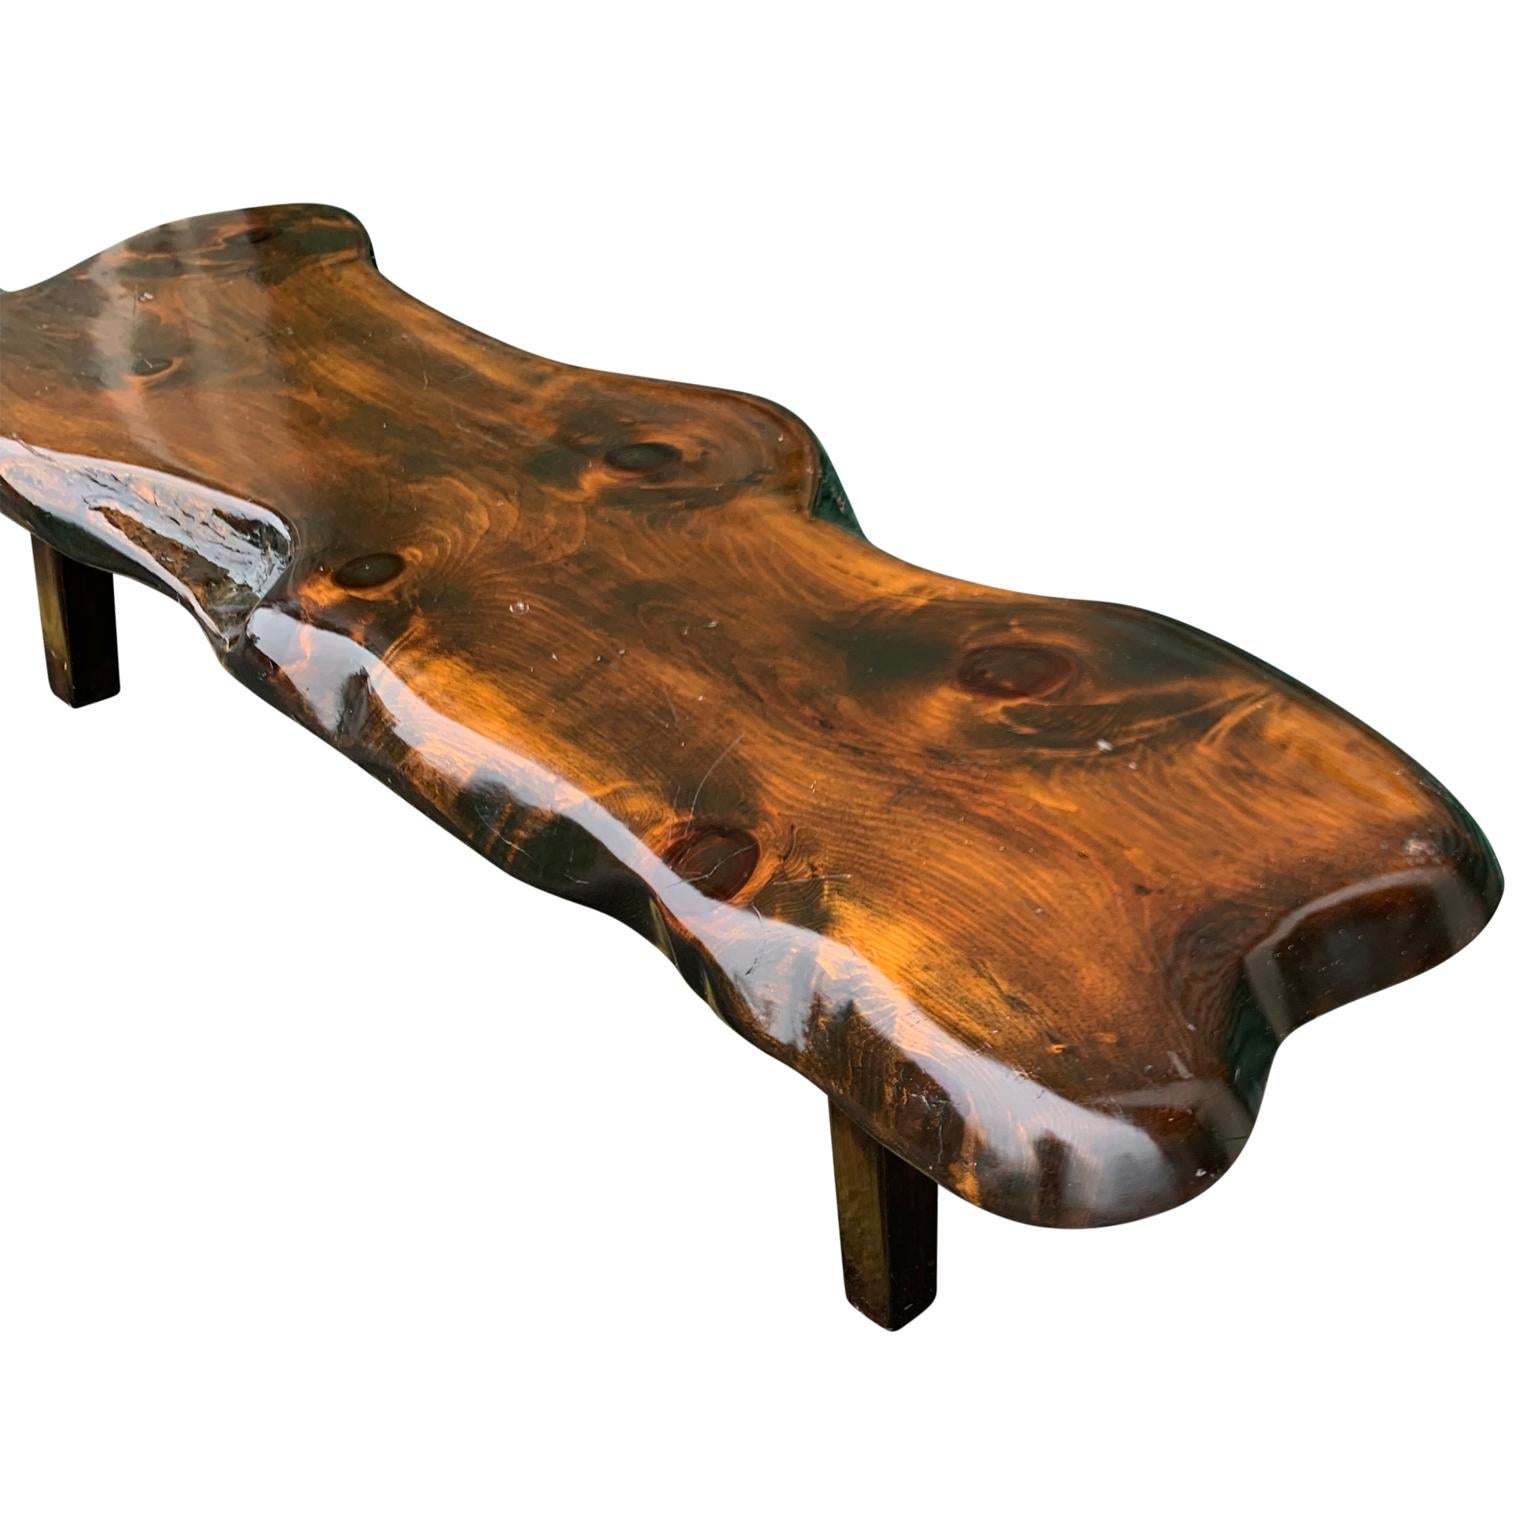 Hand-Crafted Large Wooden Folk Art Bench Or Cocktail Table For Sale